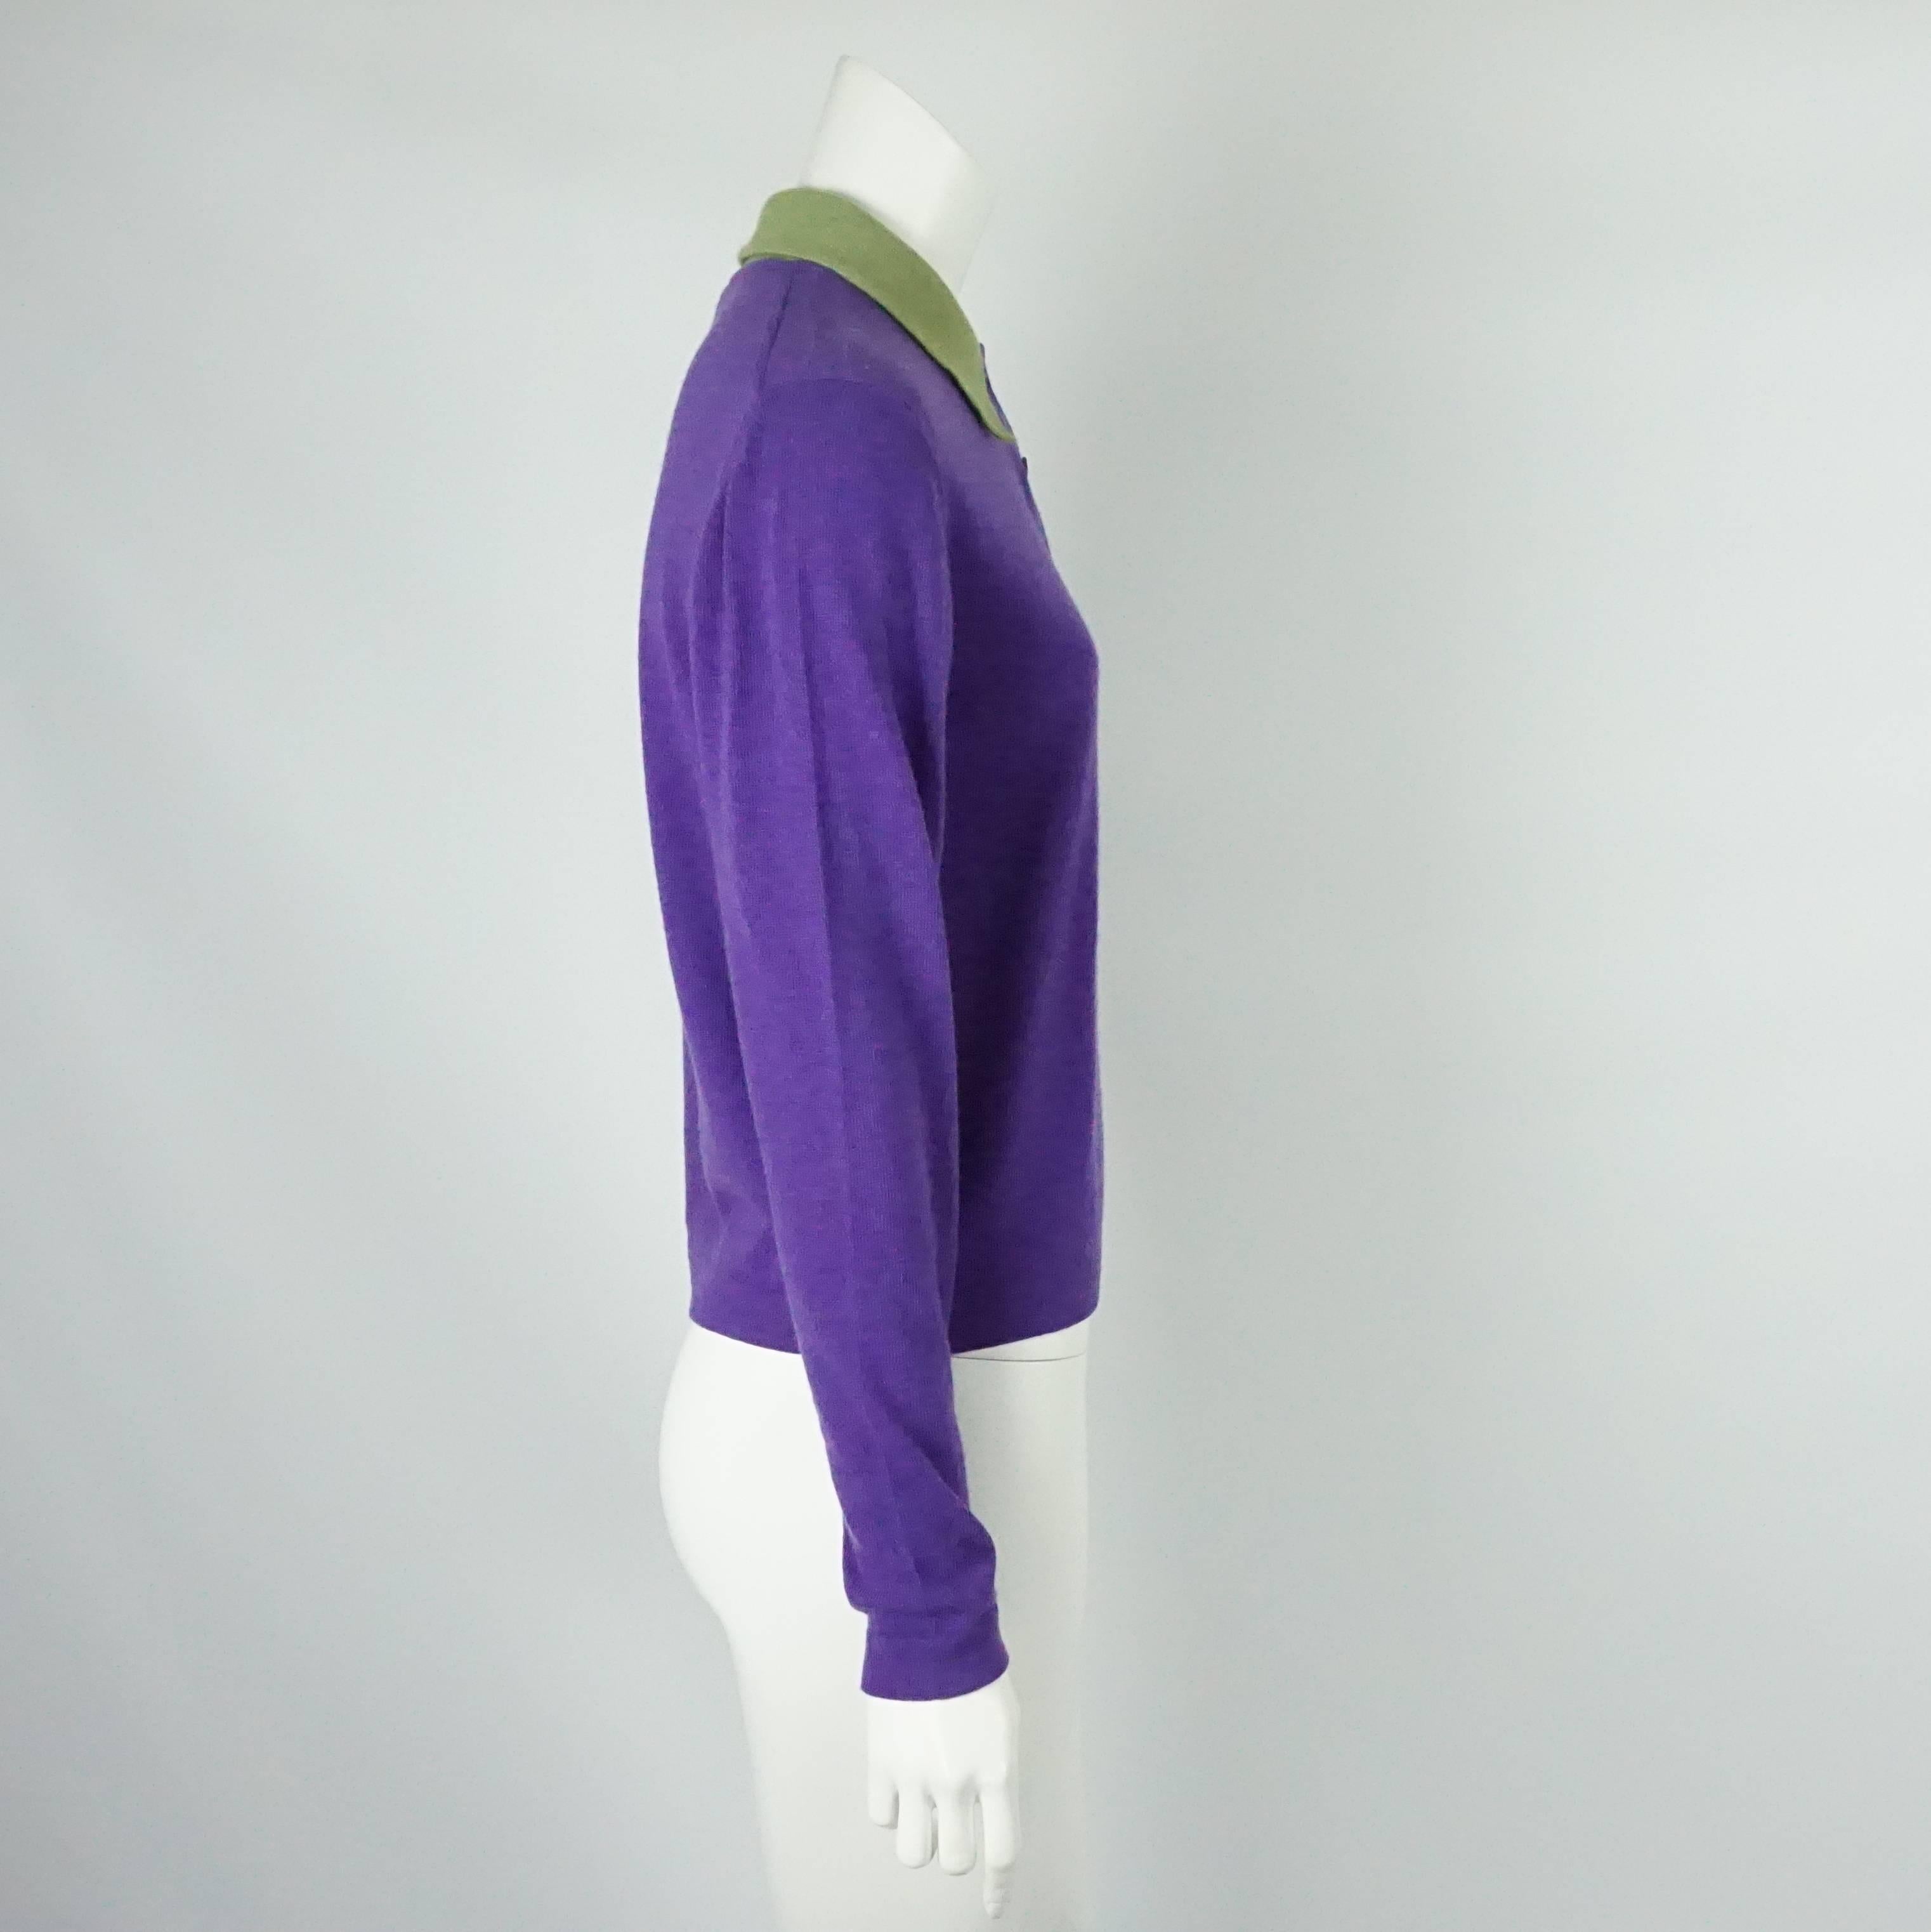 Hermes Vintage Purple Cashmere Sweater with Green Collar - L - 1970's. This sweater is in amazing vintage condition with light wear consistent with age. It brings the 70's back and is perfect for chilly weather. 